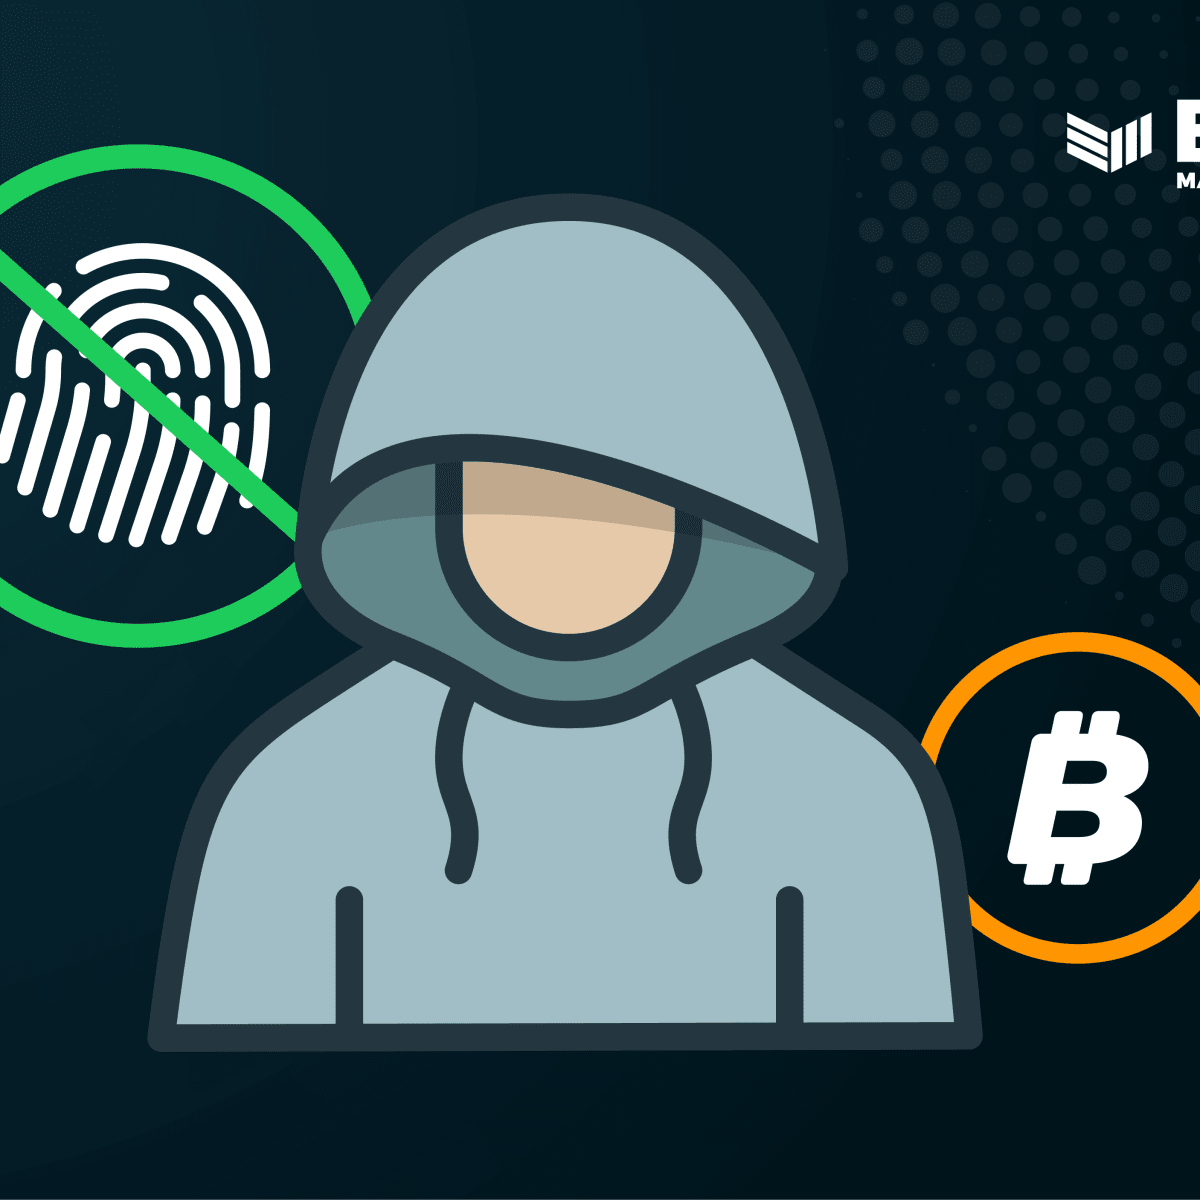 7 Best Ways To Buy Bitcoin Without ID (How To Buy Bitcoin Anonymously)